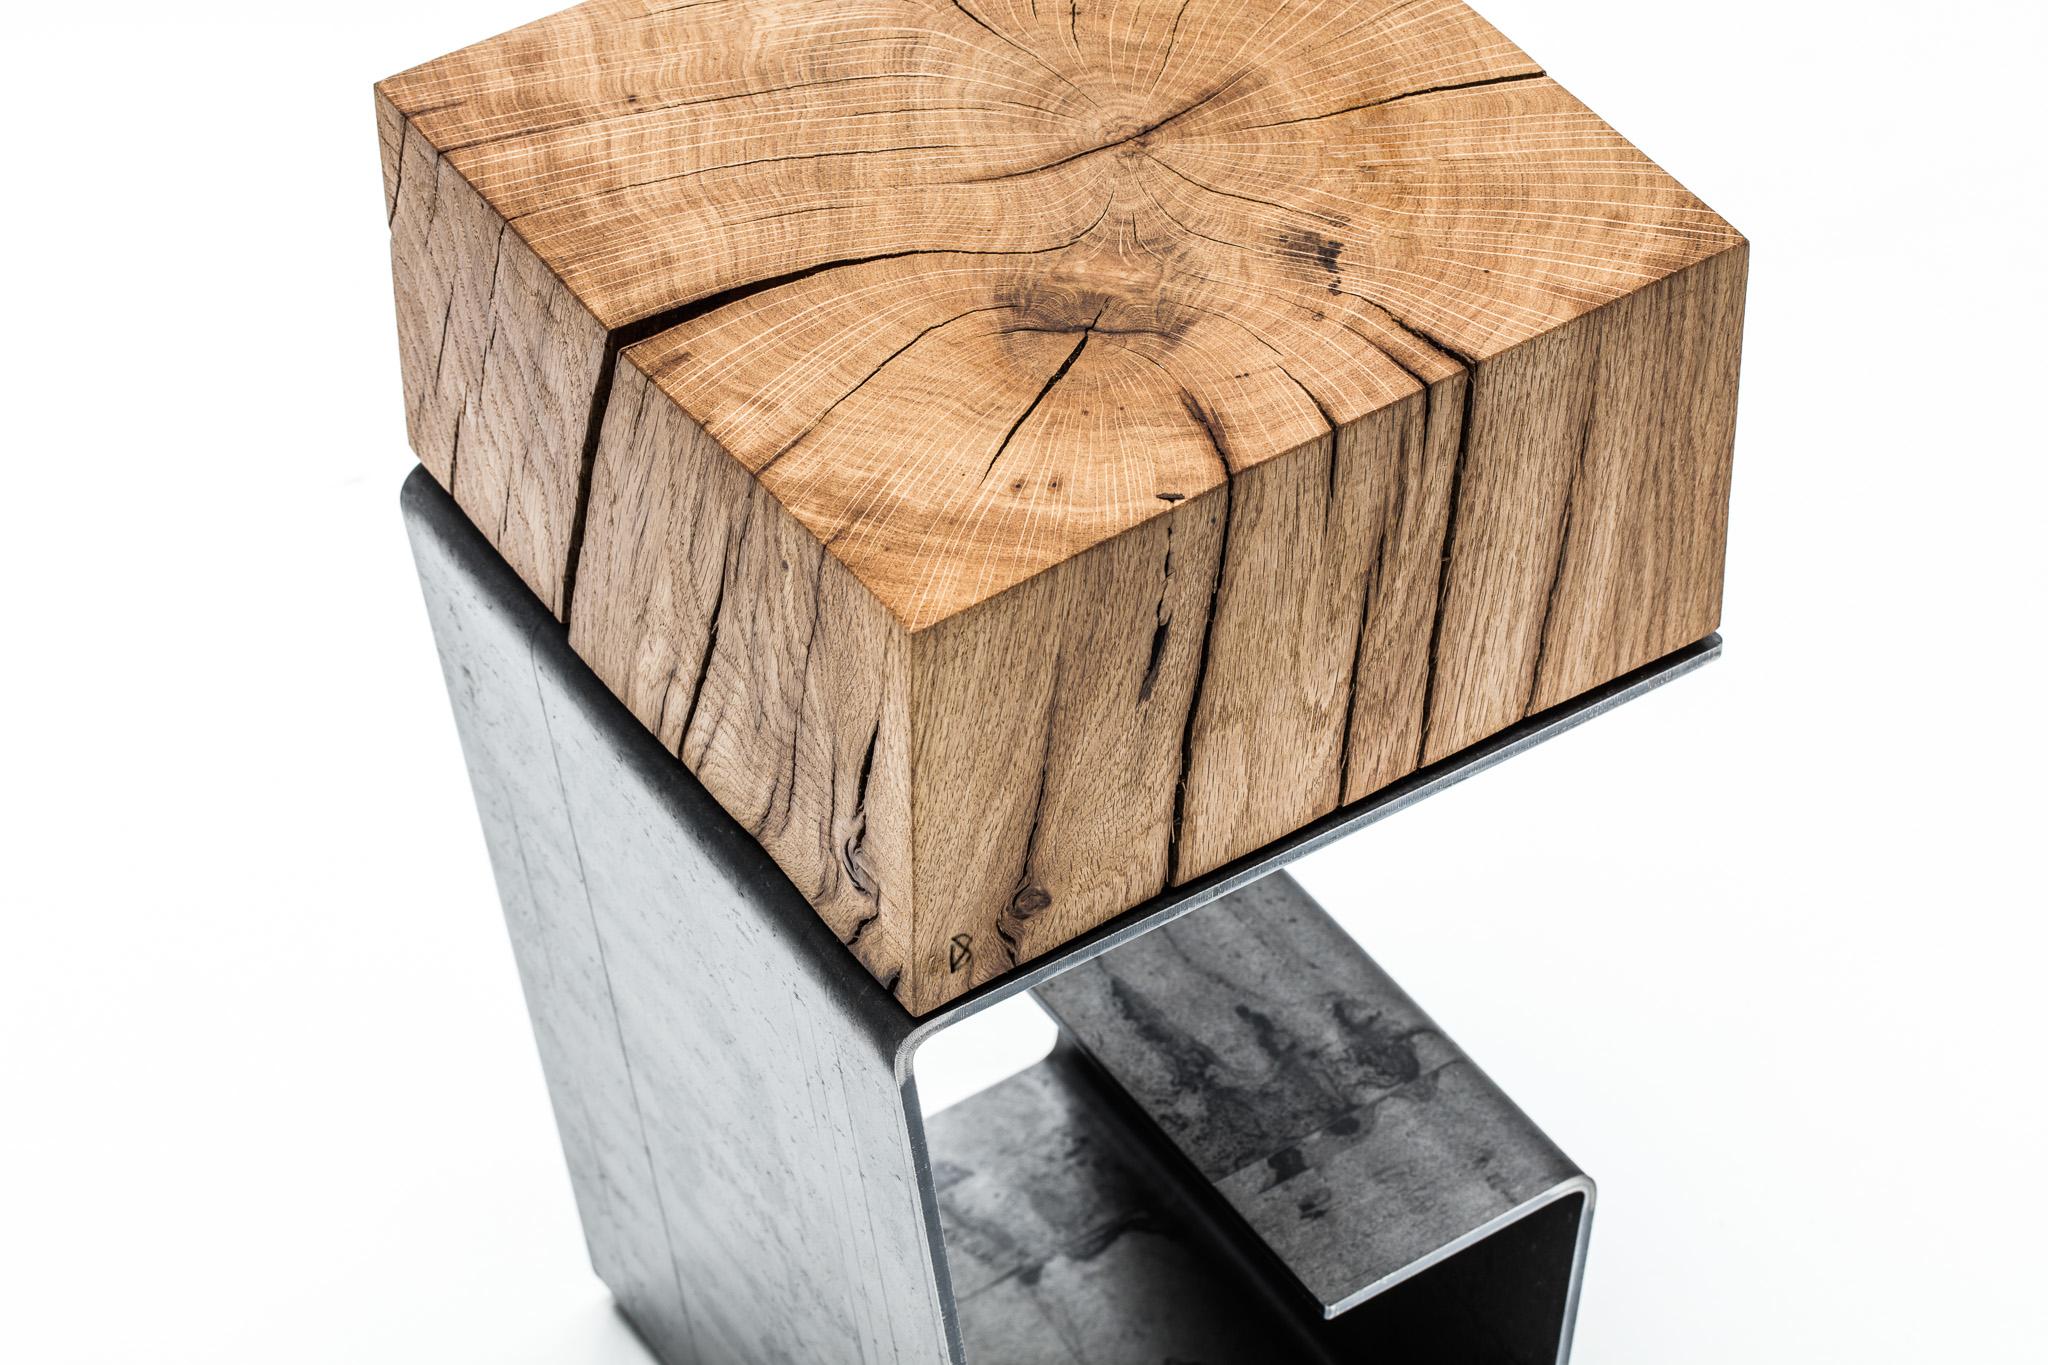 THE LINE Side Table

It is the G-shaped table made of the combination of the 200/300-year-old oak and the raw steel. The oak is drummed up from the French, reclaimed beams and undergoes natural drying for 10 - 15 years in the Cotswalds area in Great